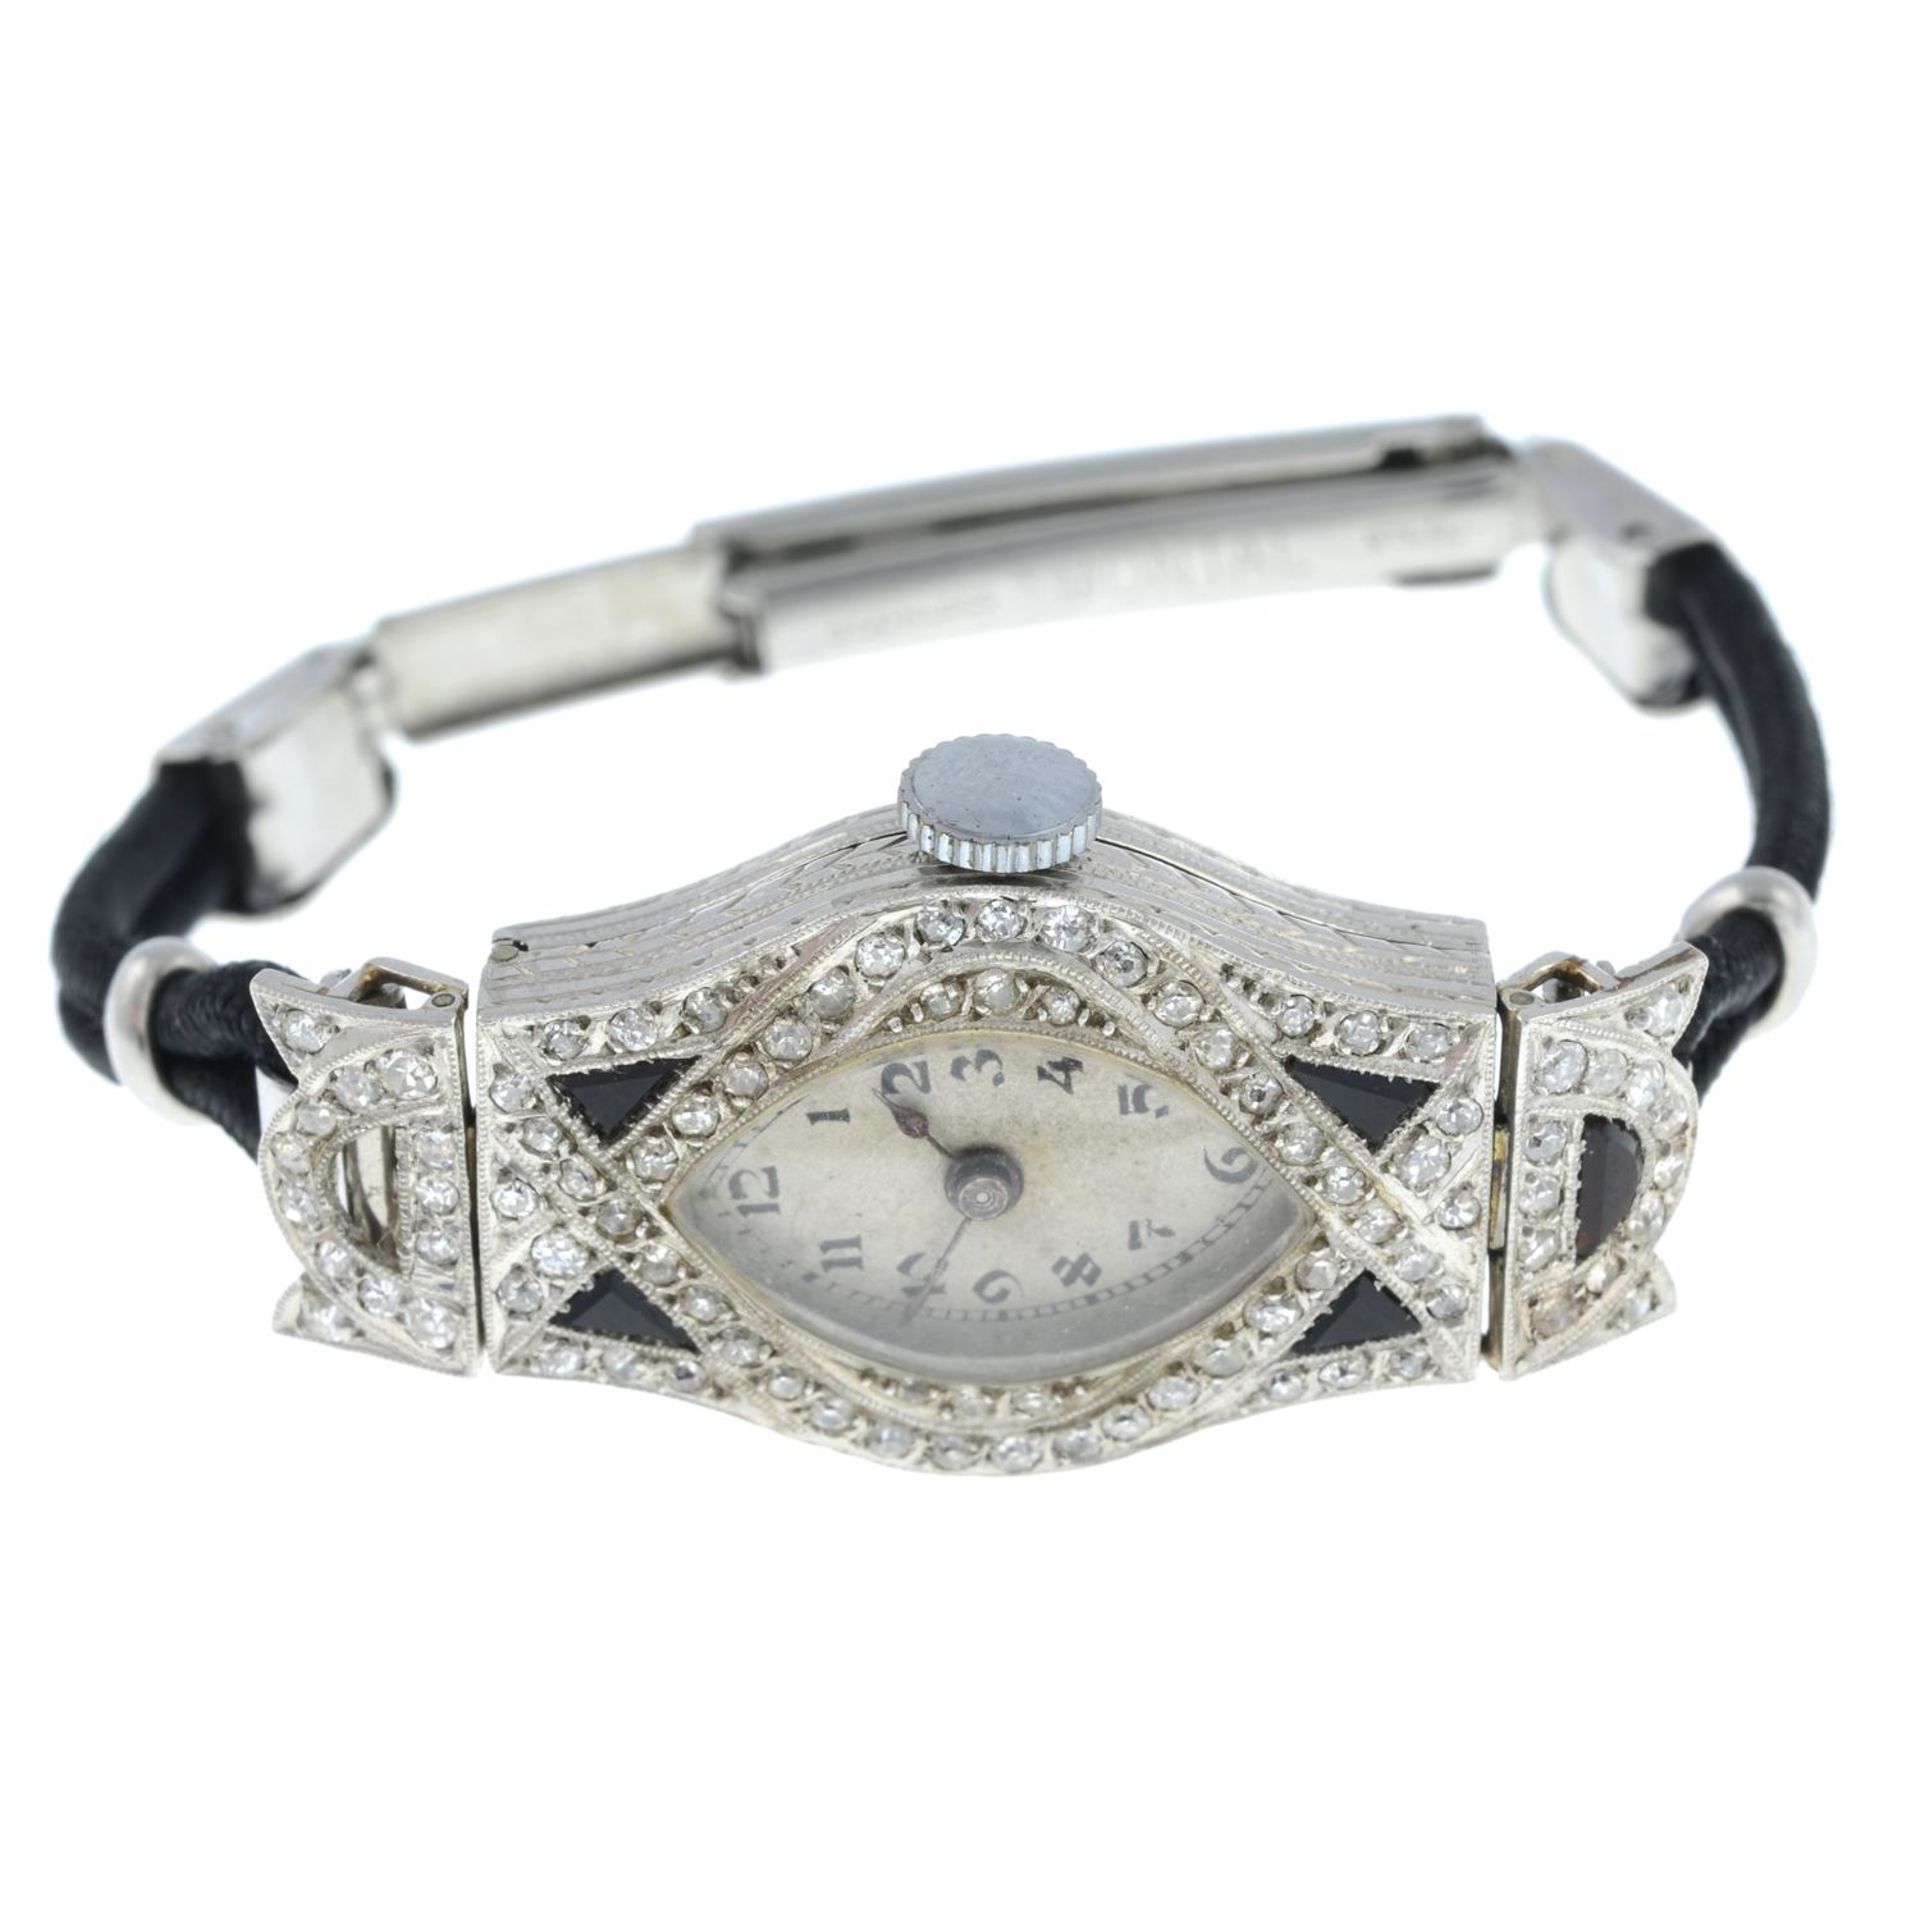 An Art Deco platinum old-cut diamond and onyx cocktail watch, with fabric and steel bracelet.